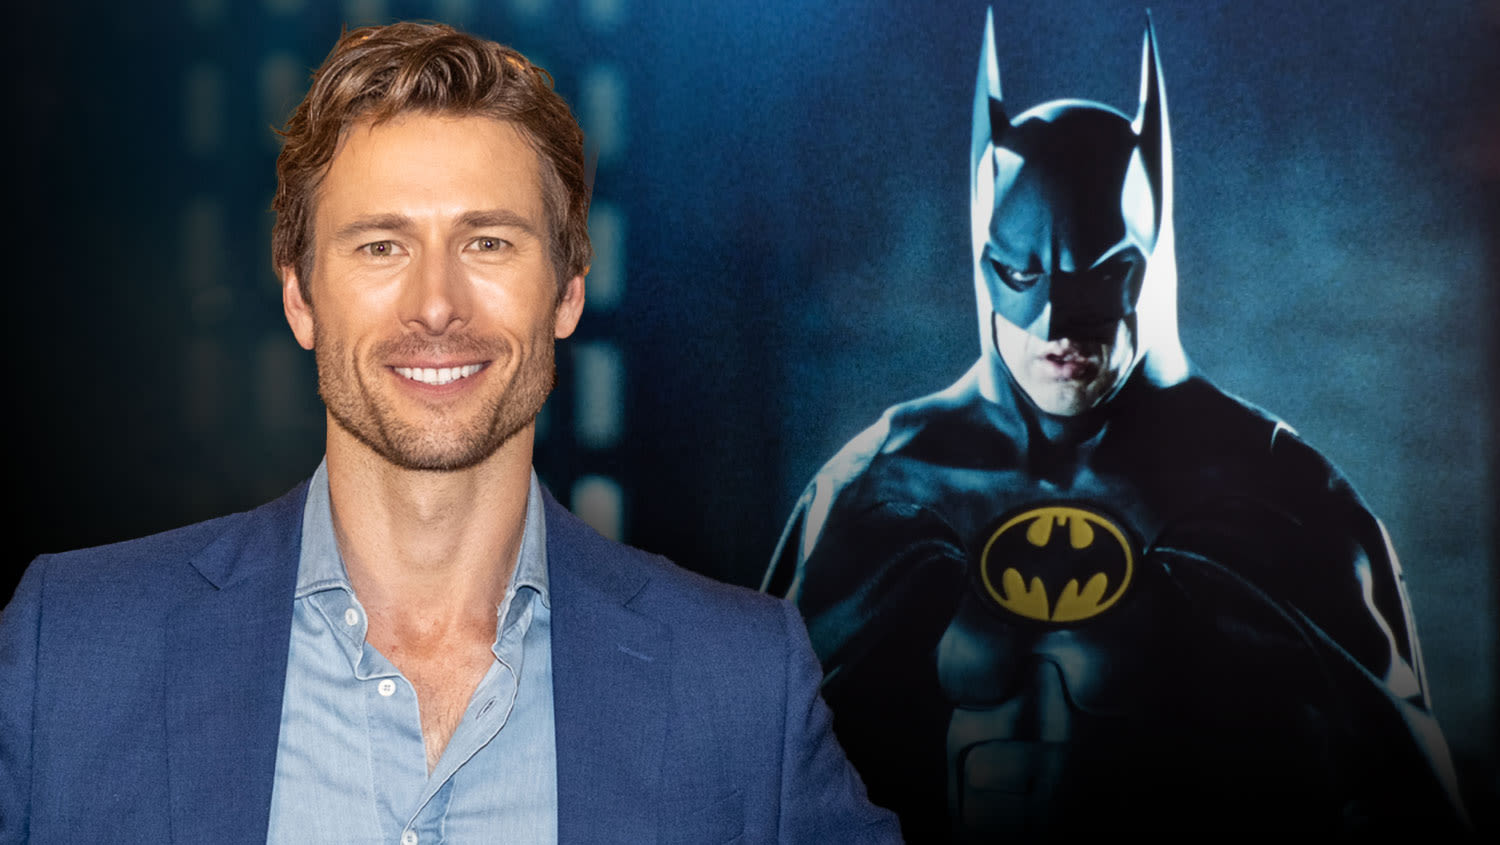 Glen Powell Says He Would Have A “Wild Take” On Playing Batman: “It Definitely Would Not Be Like A Matt Reeves...